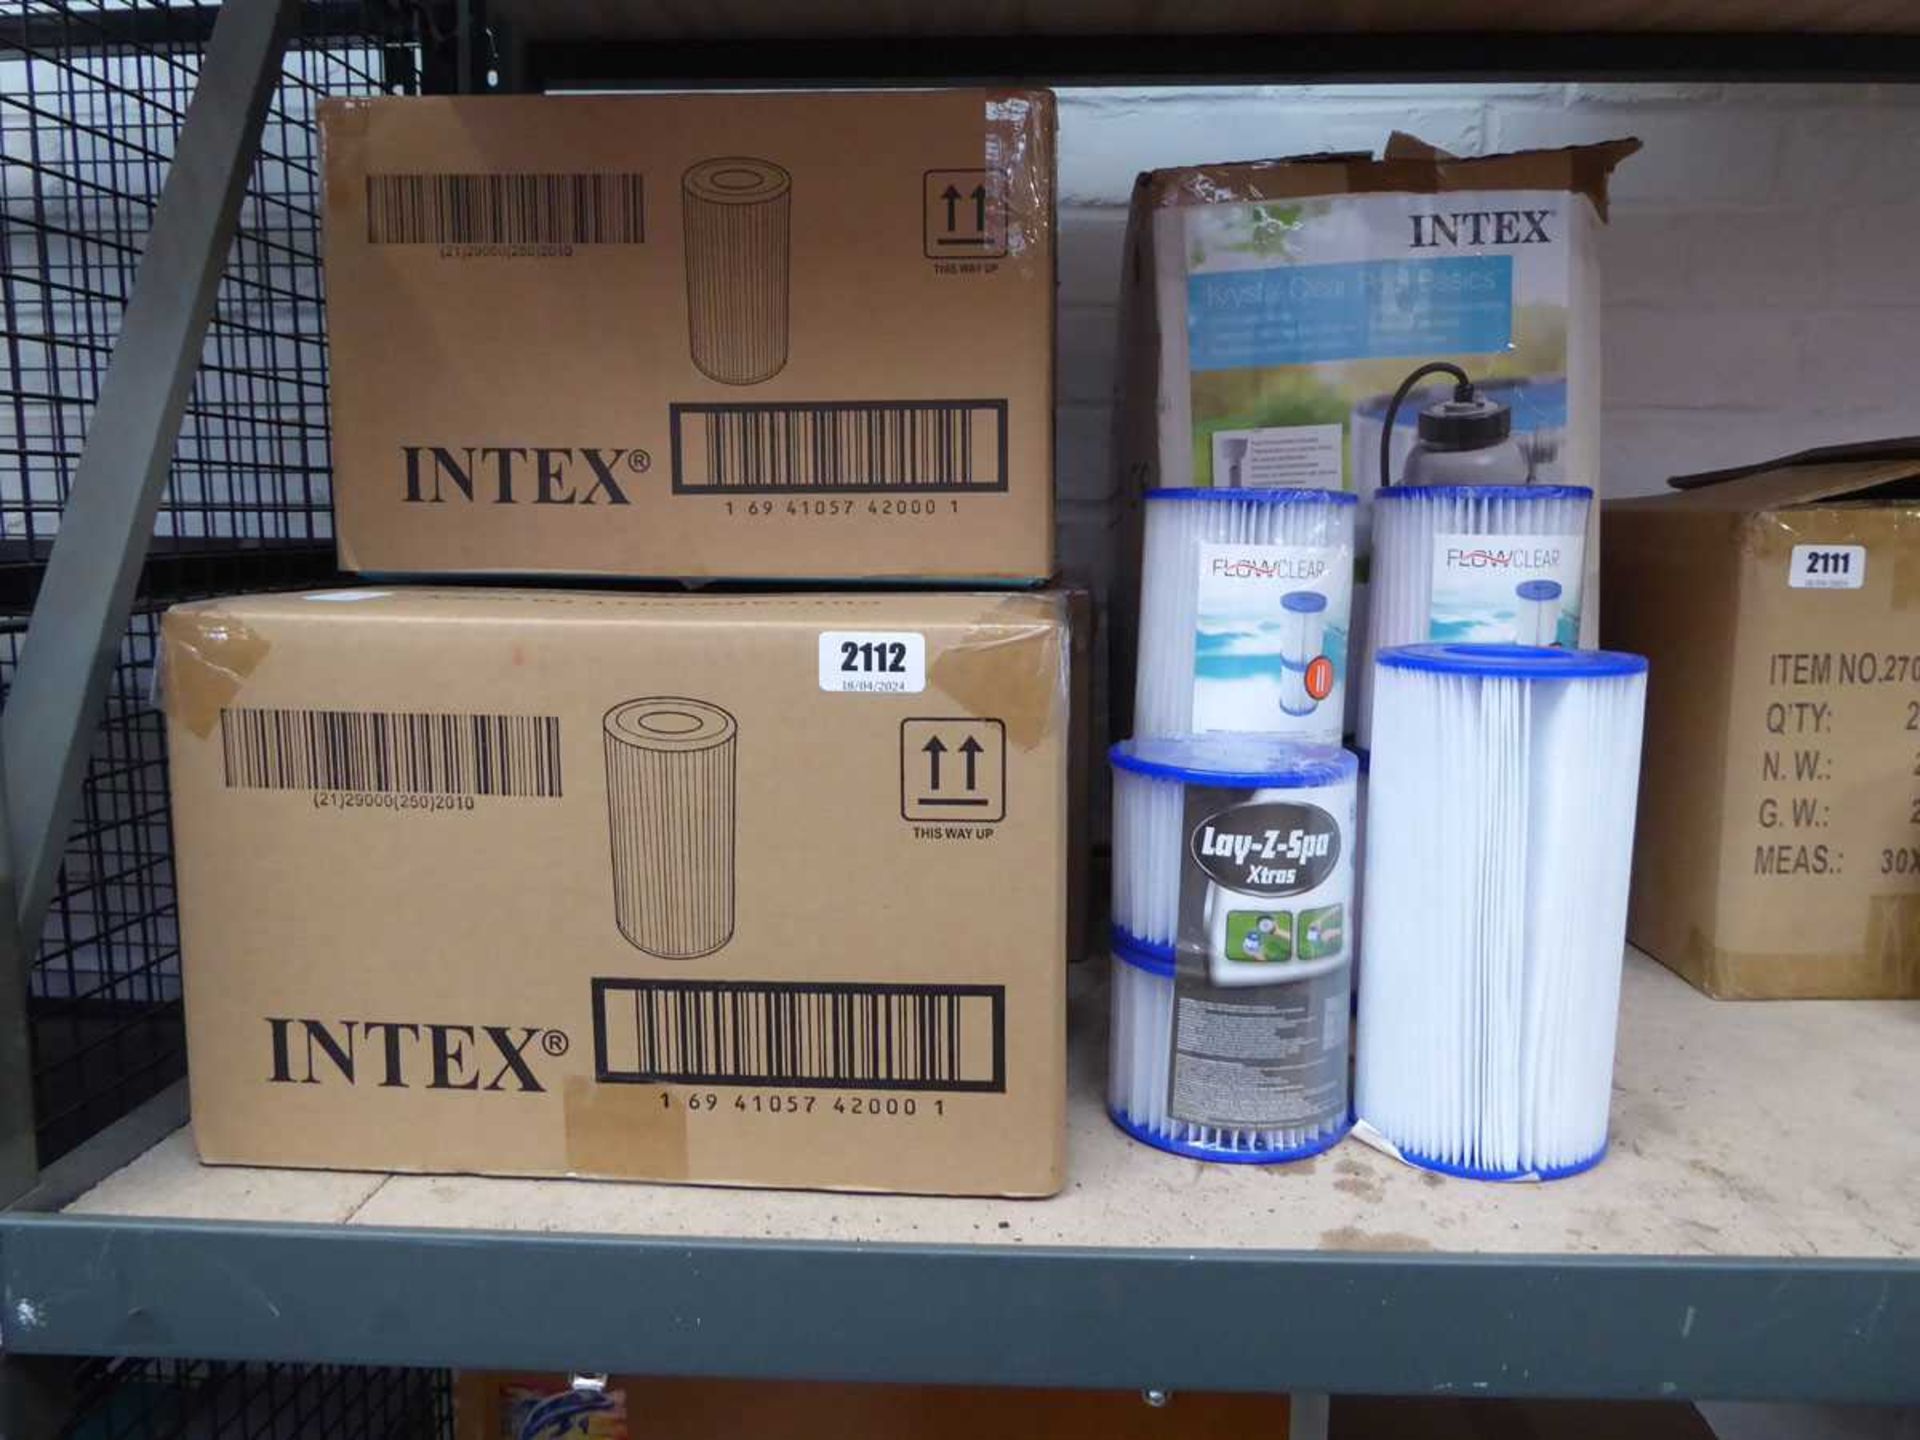 3 boxes of Intex crystal clear pool filter cartridges together with Intex crystal clear electric